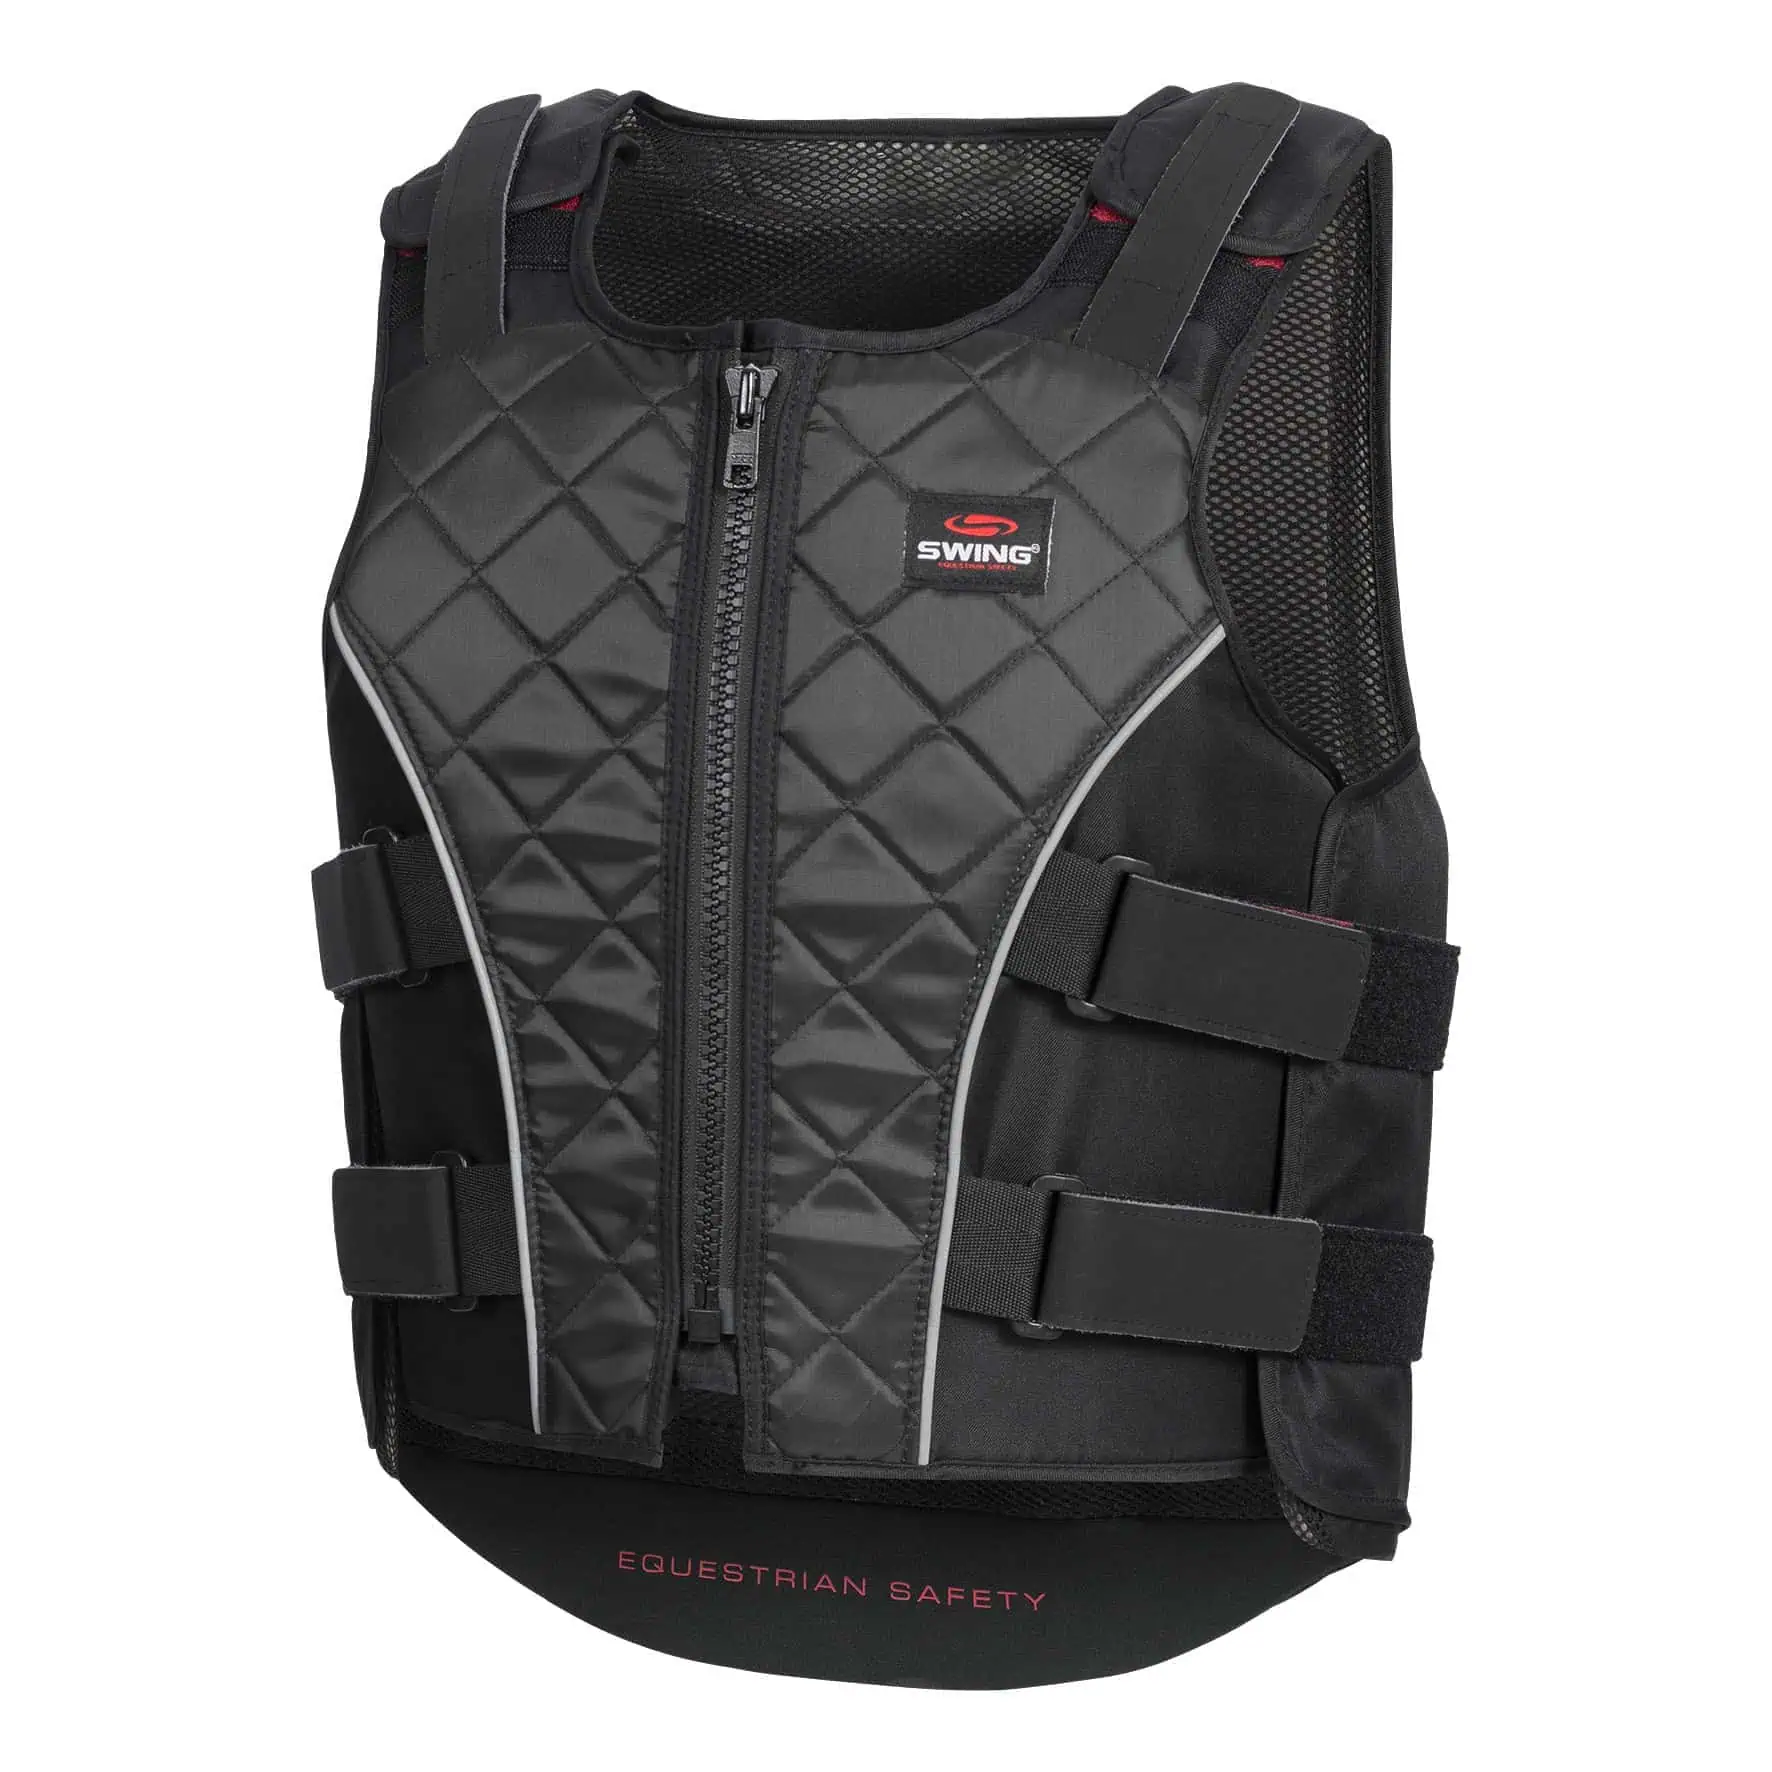 SWING P19 Body Protector with zip, adults black/gray L